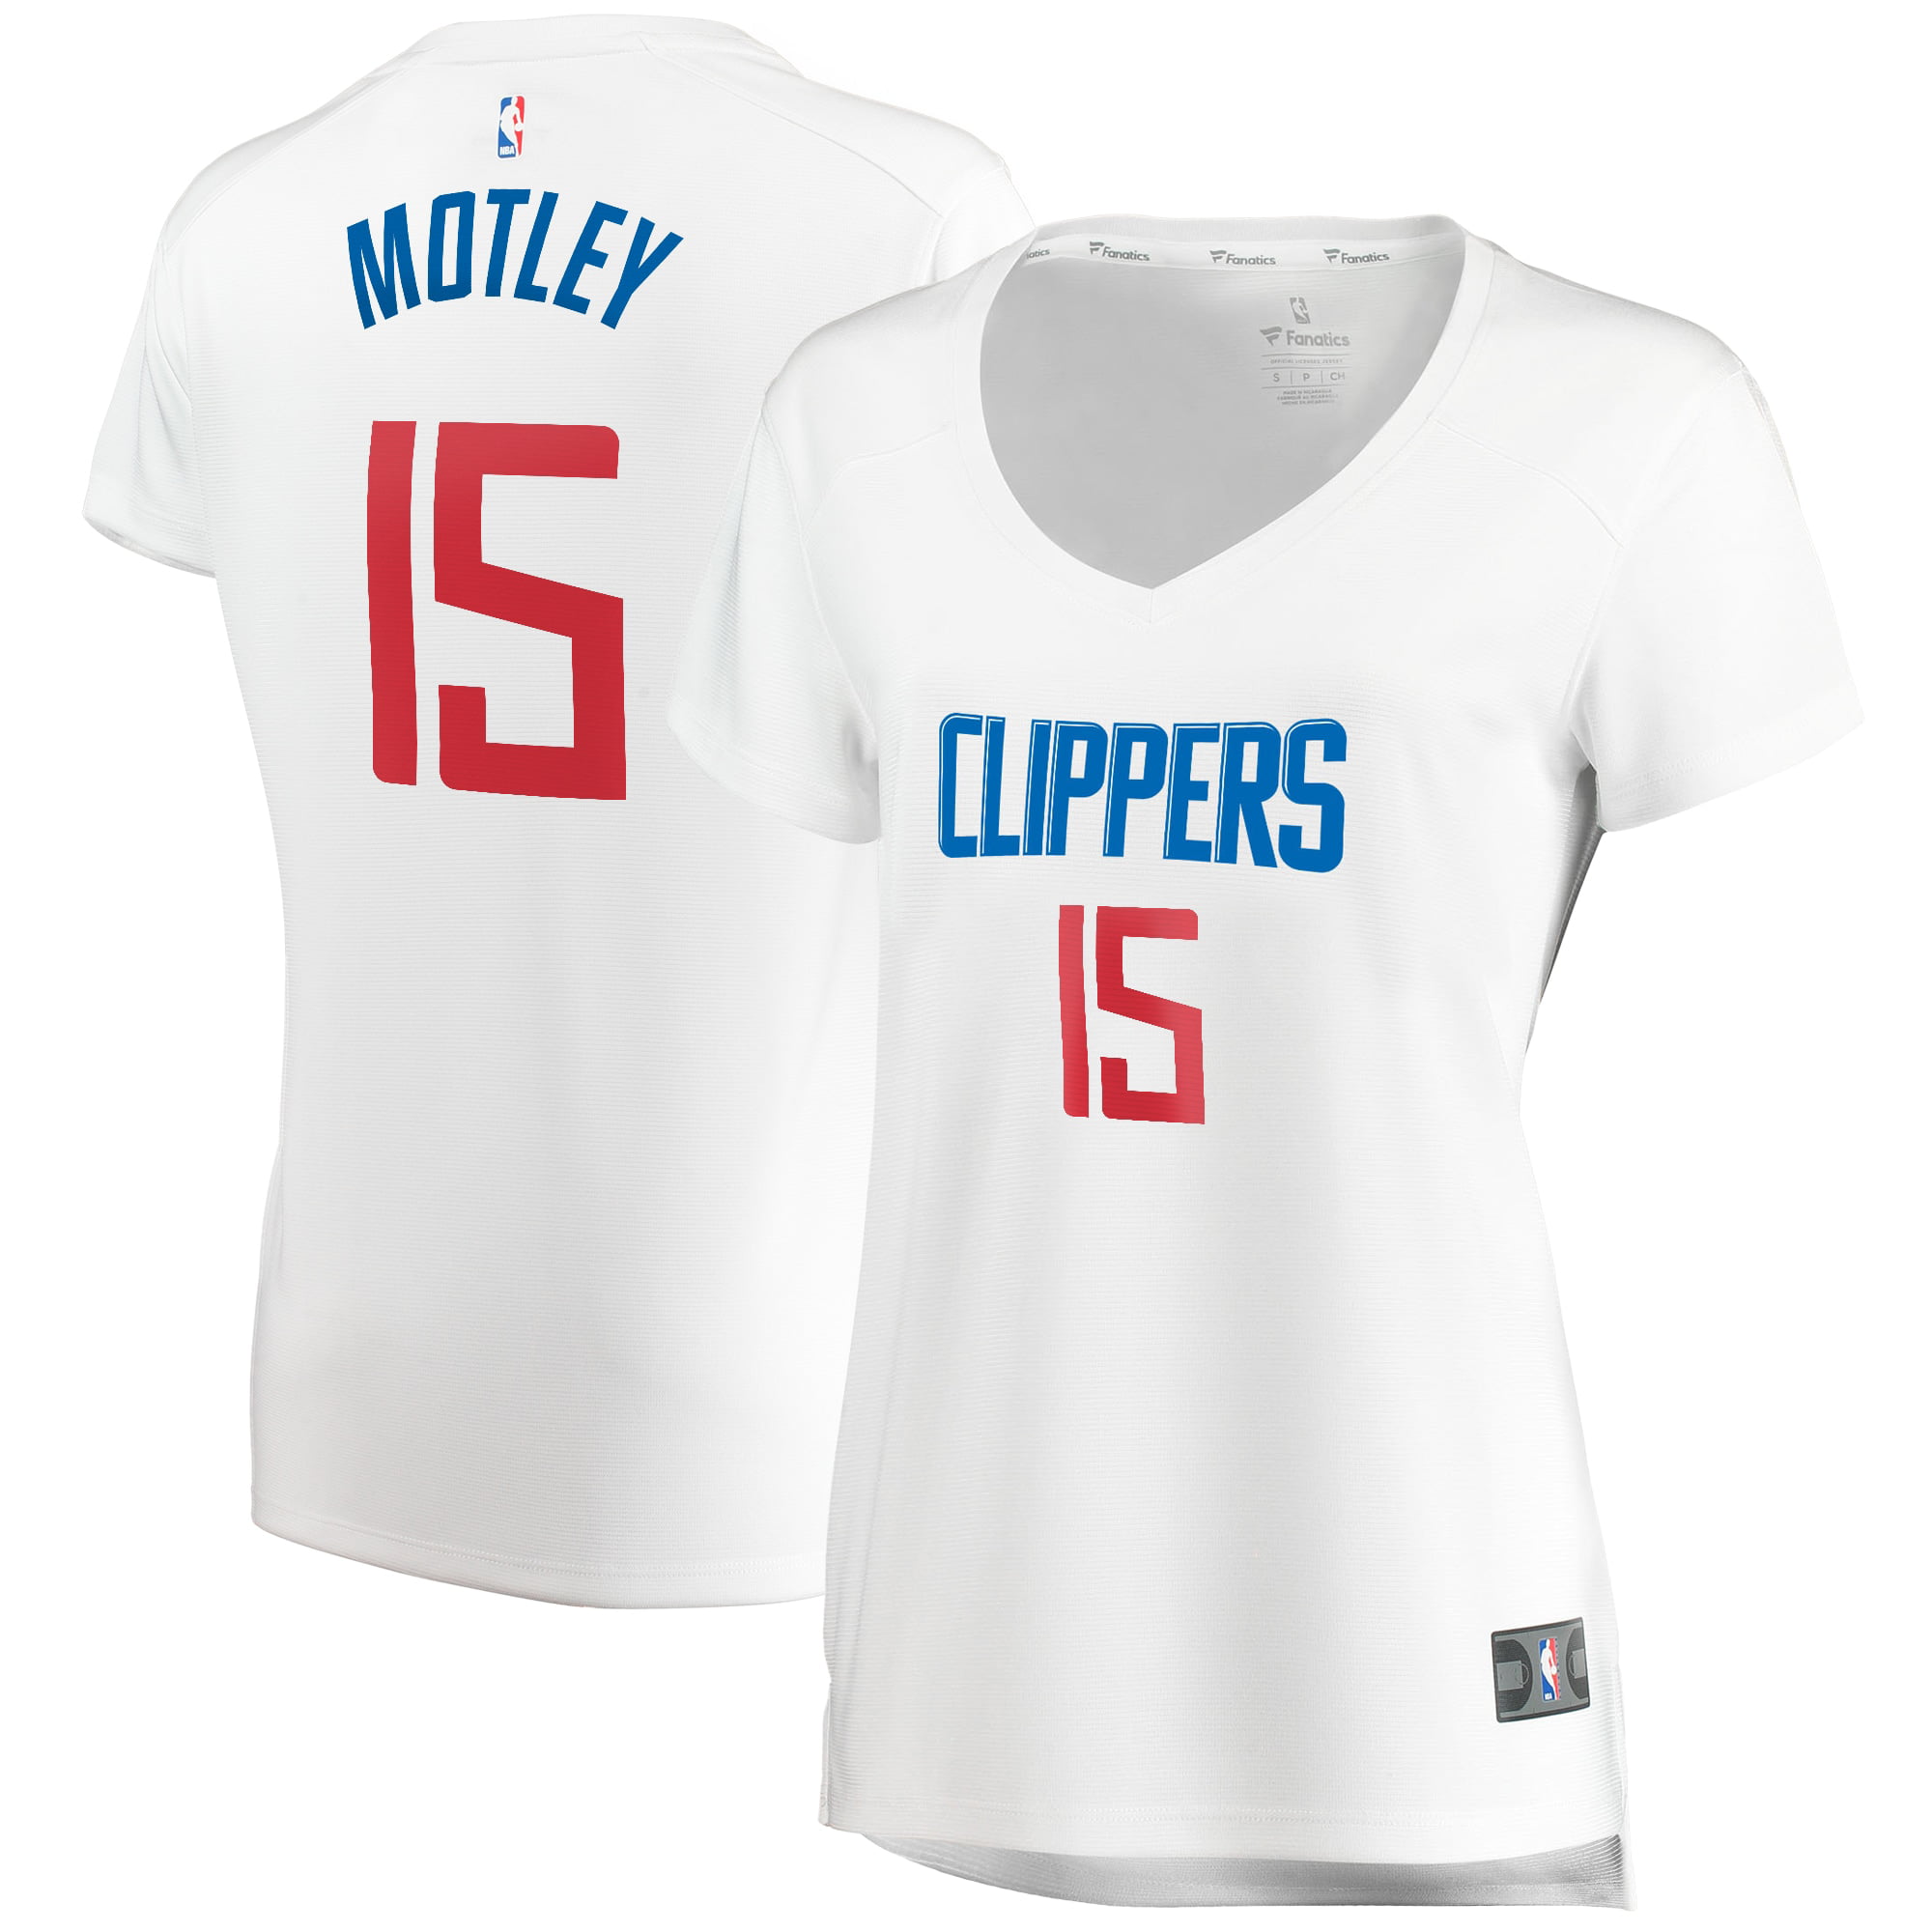 clippers association jersey